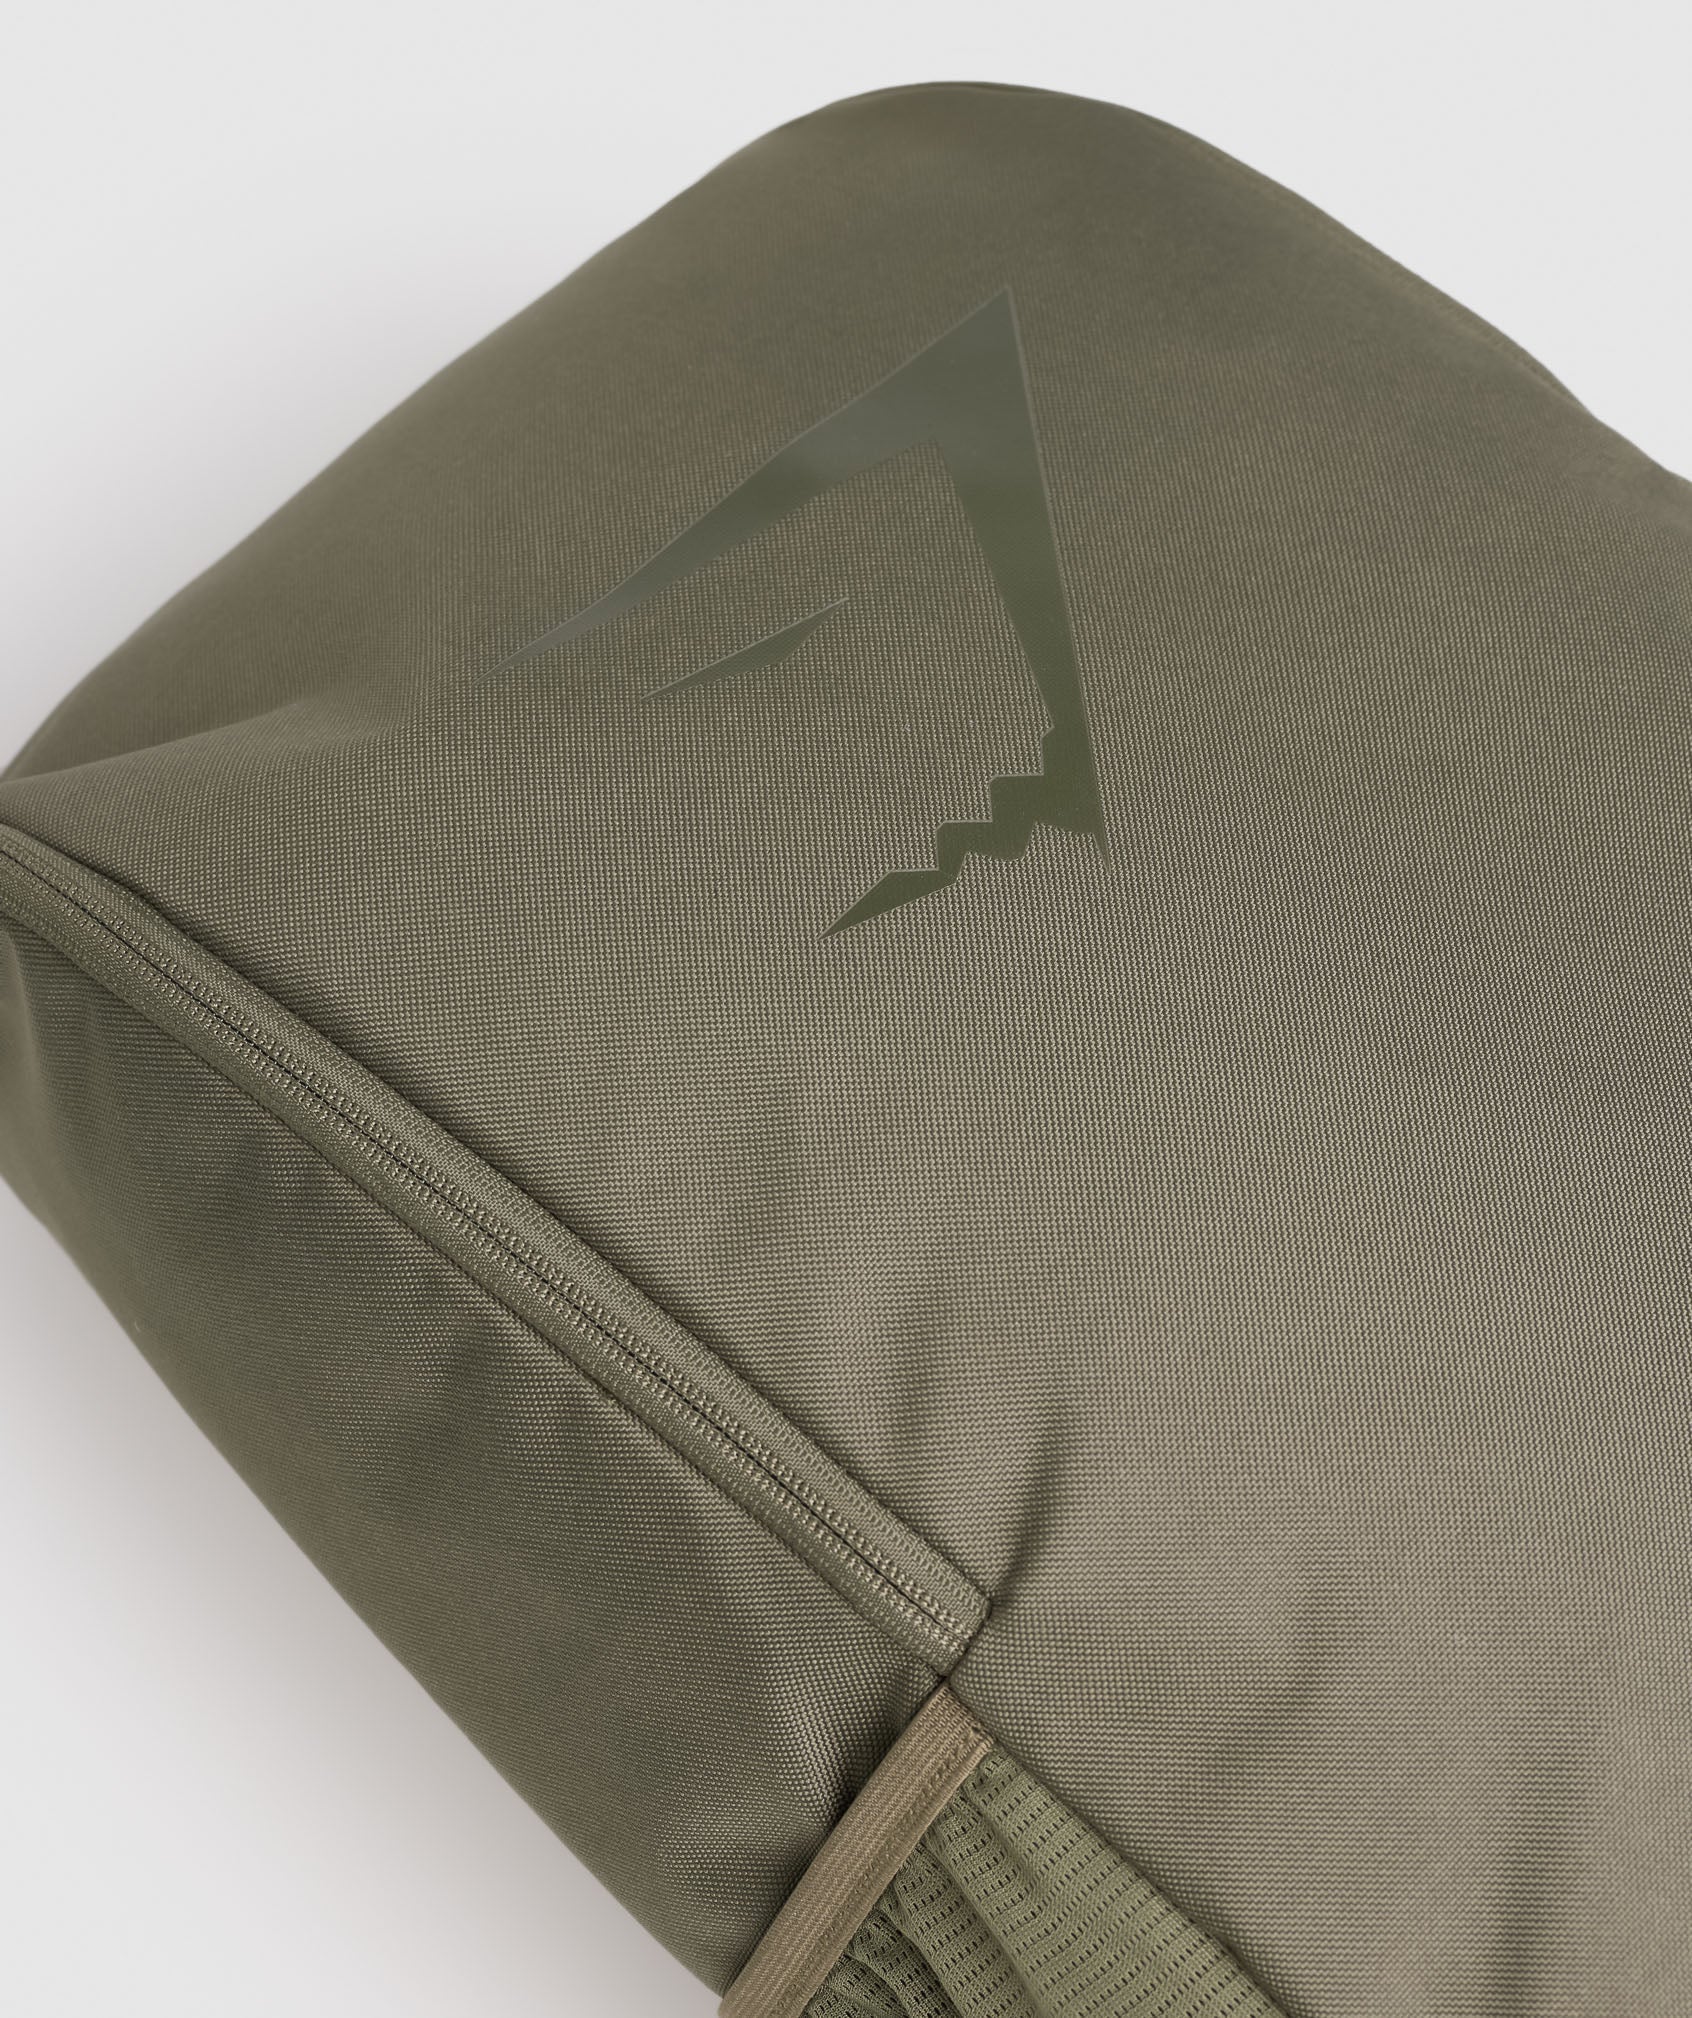 Sharkhead Backpack in Core Olive - view 3